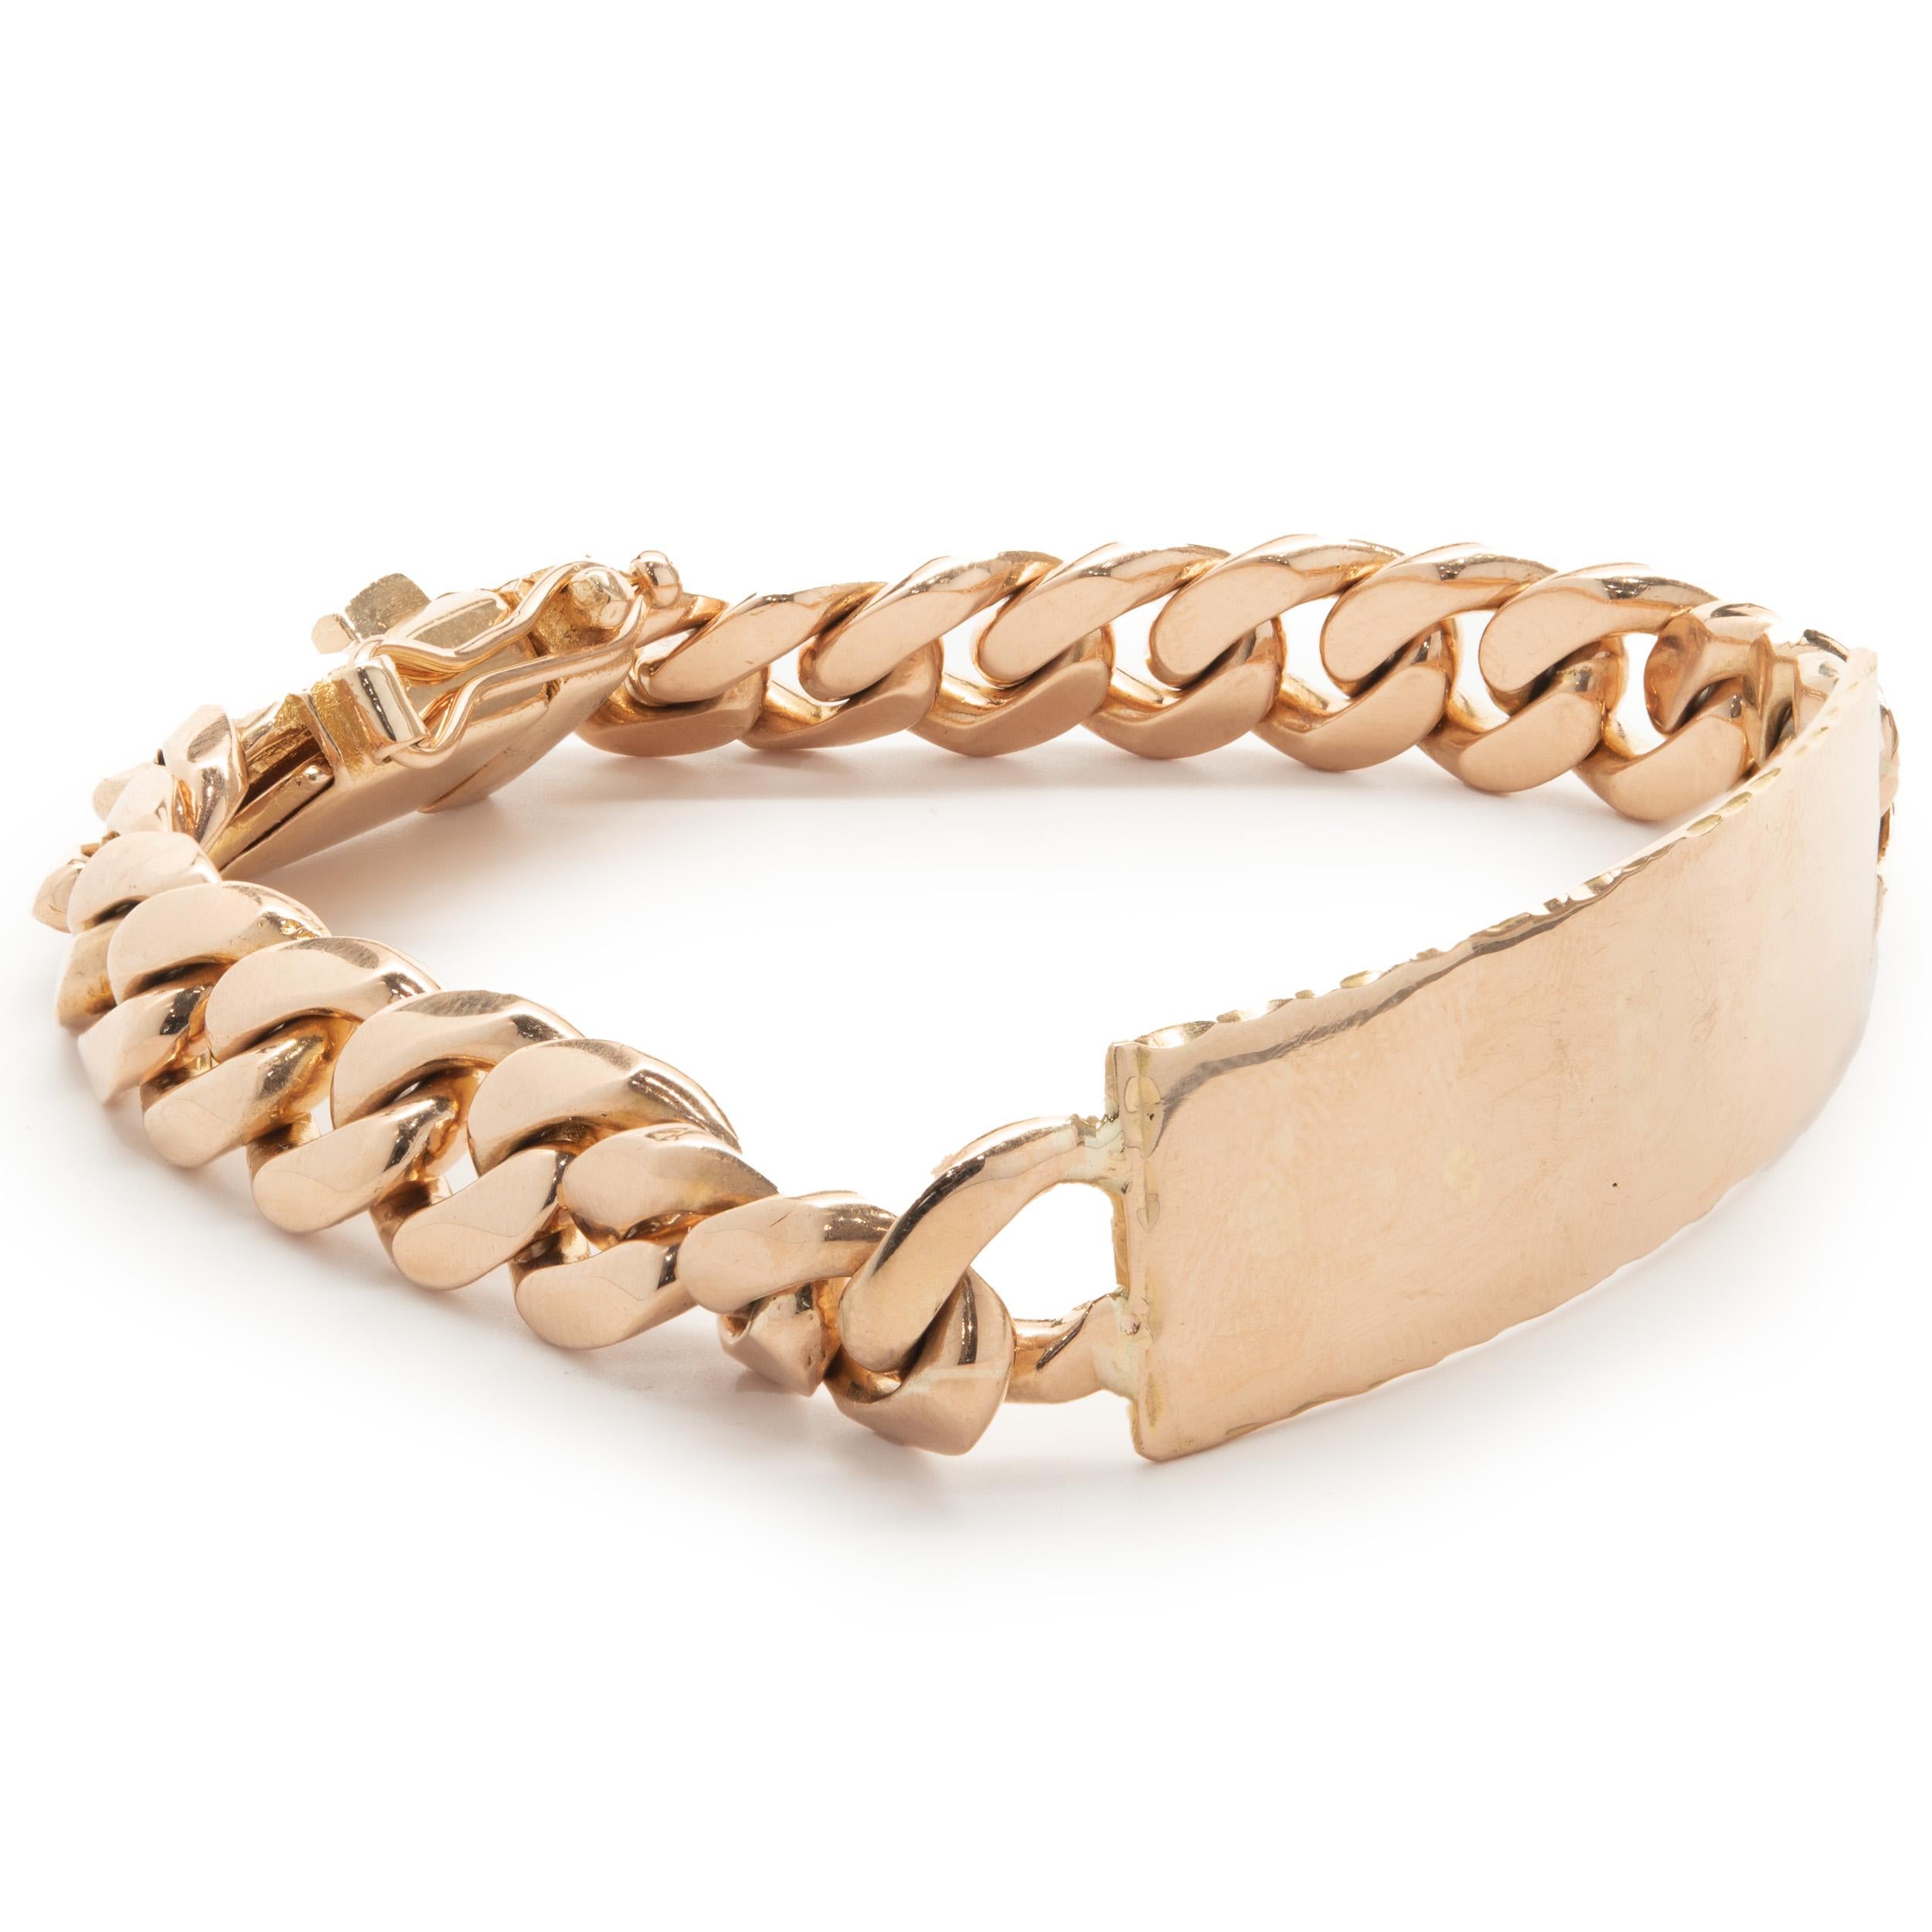 Material: 18K Rose gold
Dimensions: bracelet will fit up to an 8.25-inch wrist
Weight: 63.14 grams